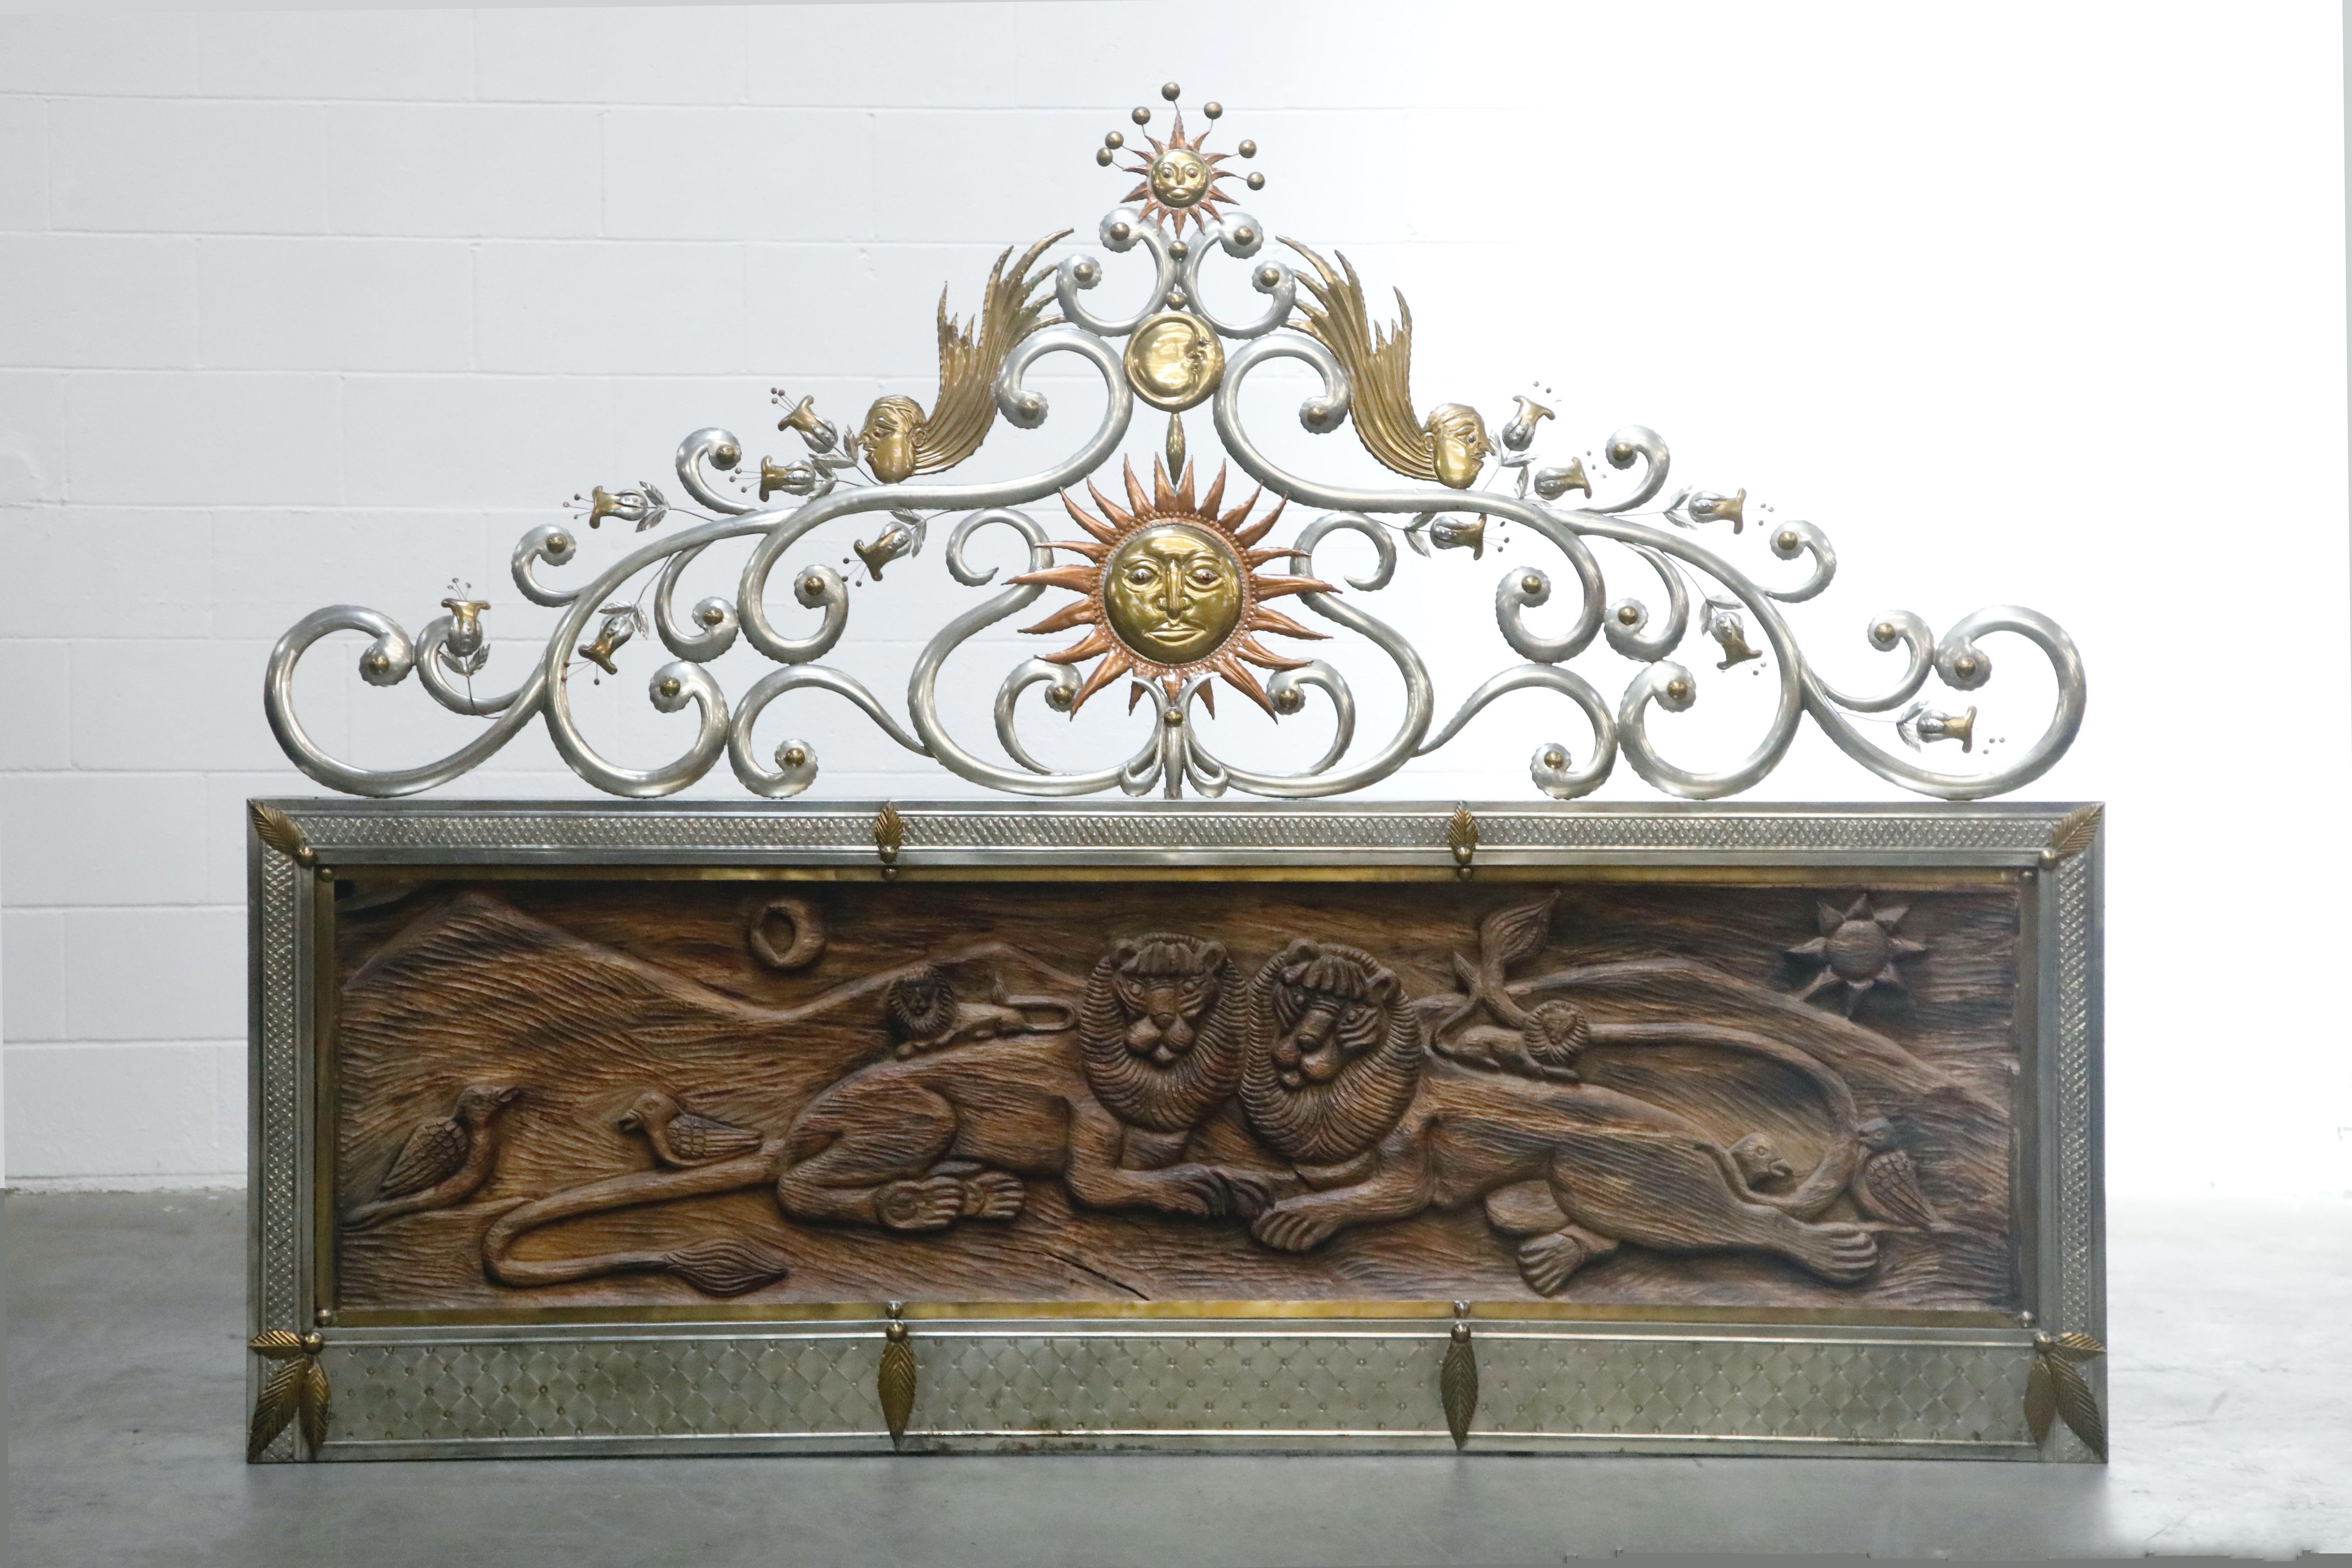 This incredible carved wood, copper, brass and tin King Sized Headboard is attributed to Sergio Bustamante, circa 1970s, and features intricately carved wood and sculpted copper, tin and brass. 

The upper portion of this functional art piece